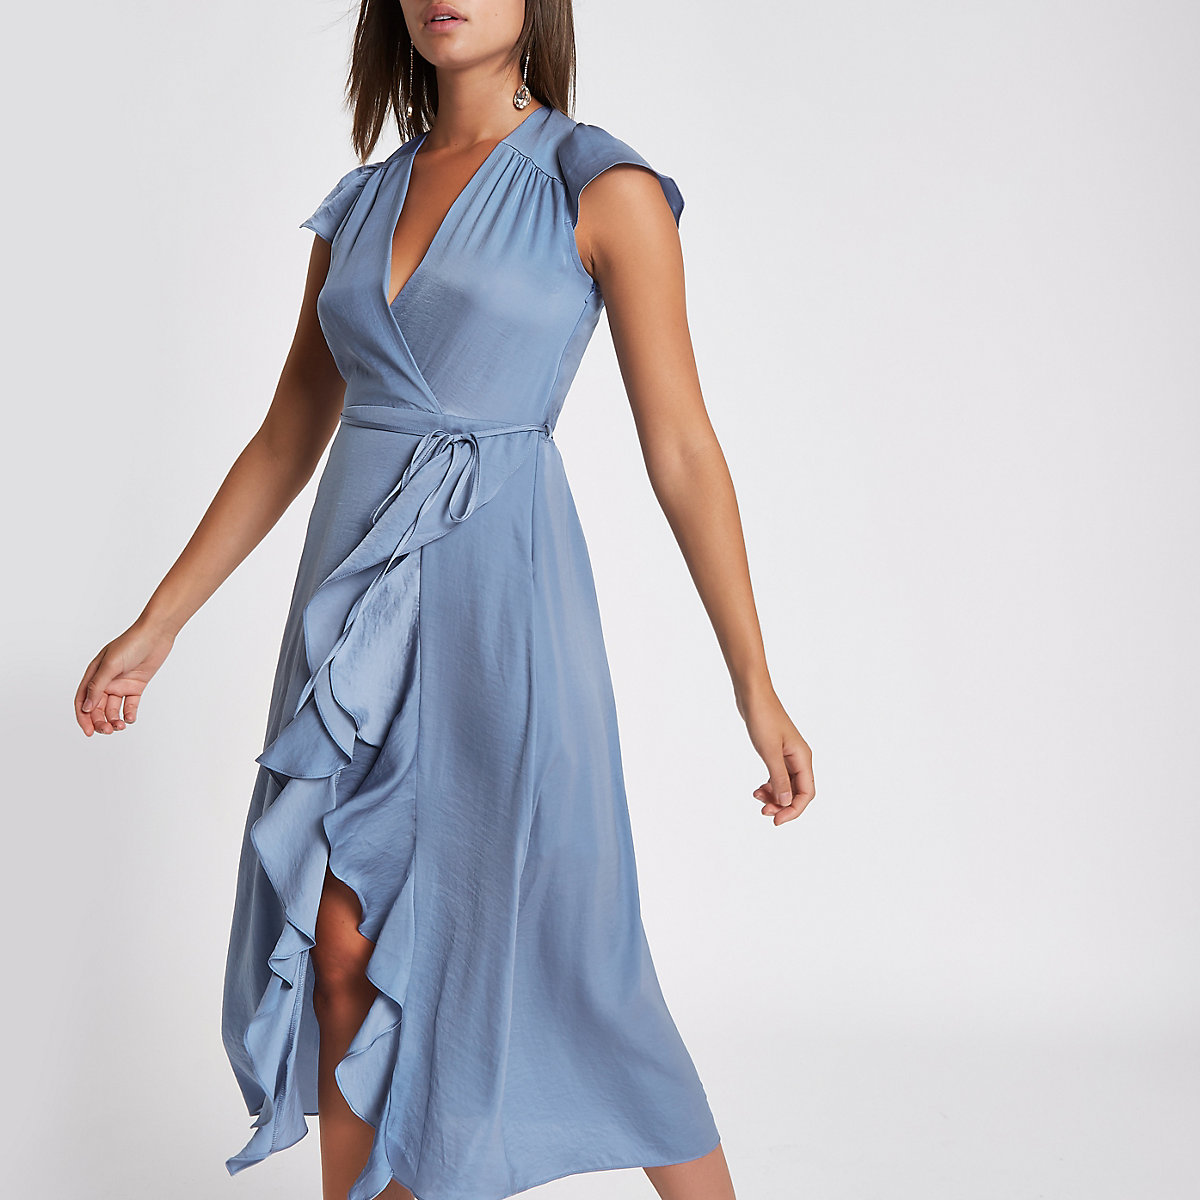 15 Wrap Dresses Perfect For A Summer Wedding - Society19